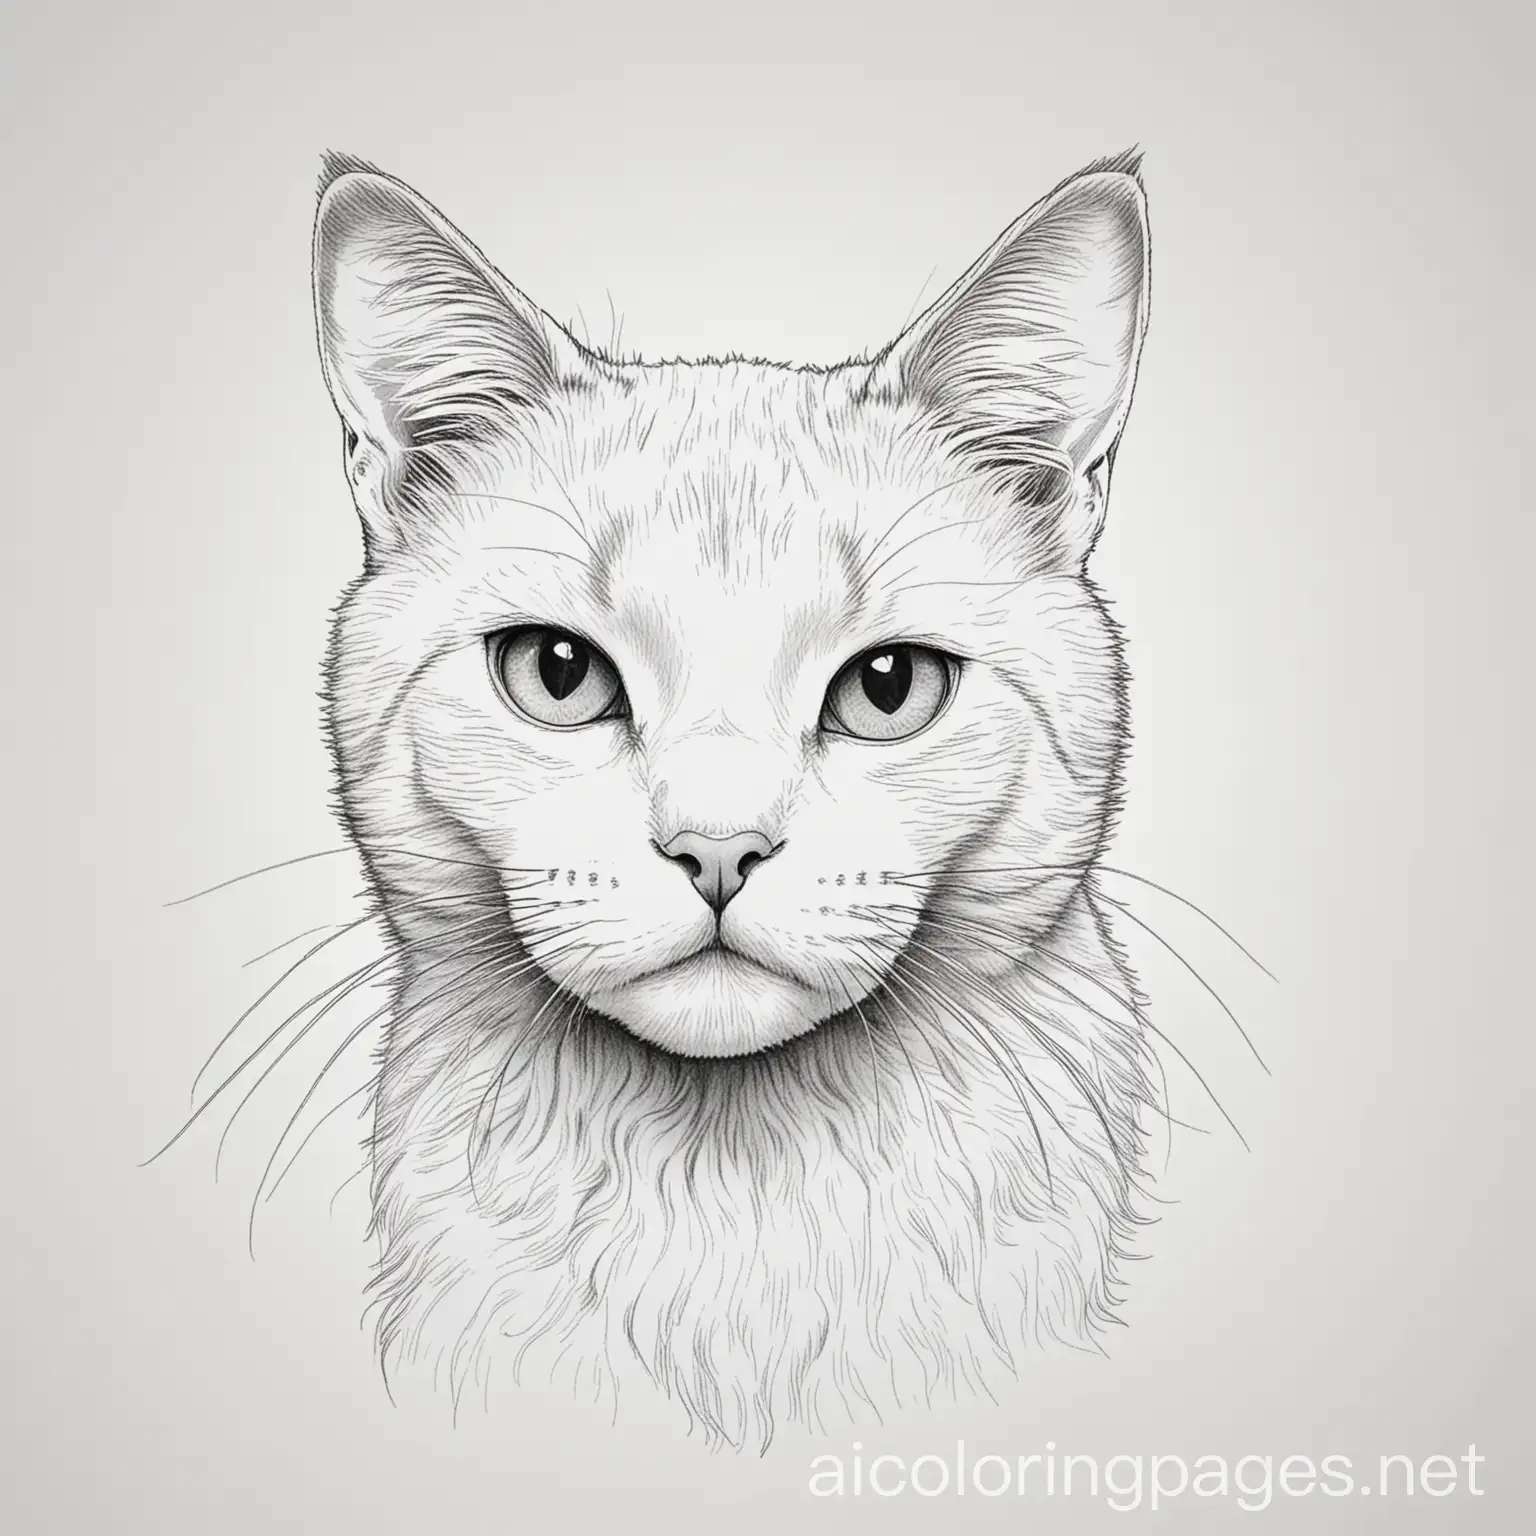 Simplicity-in-Line-Art-Cat-Coloring-Page-on-White-Background